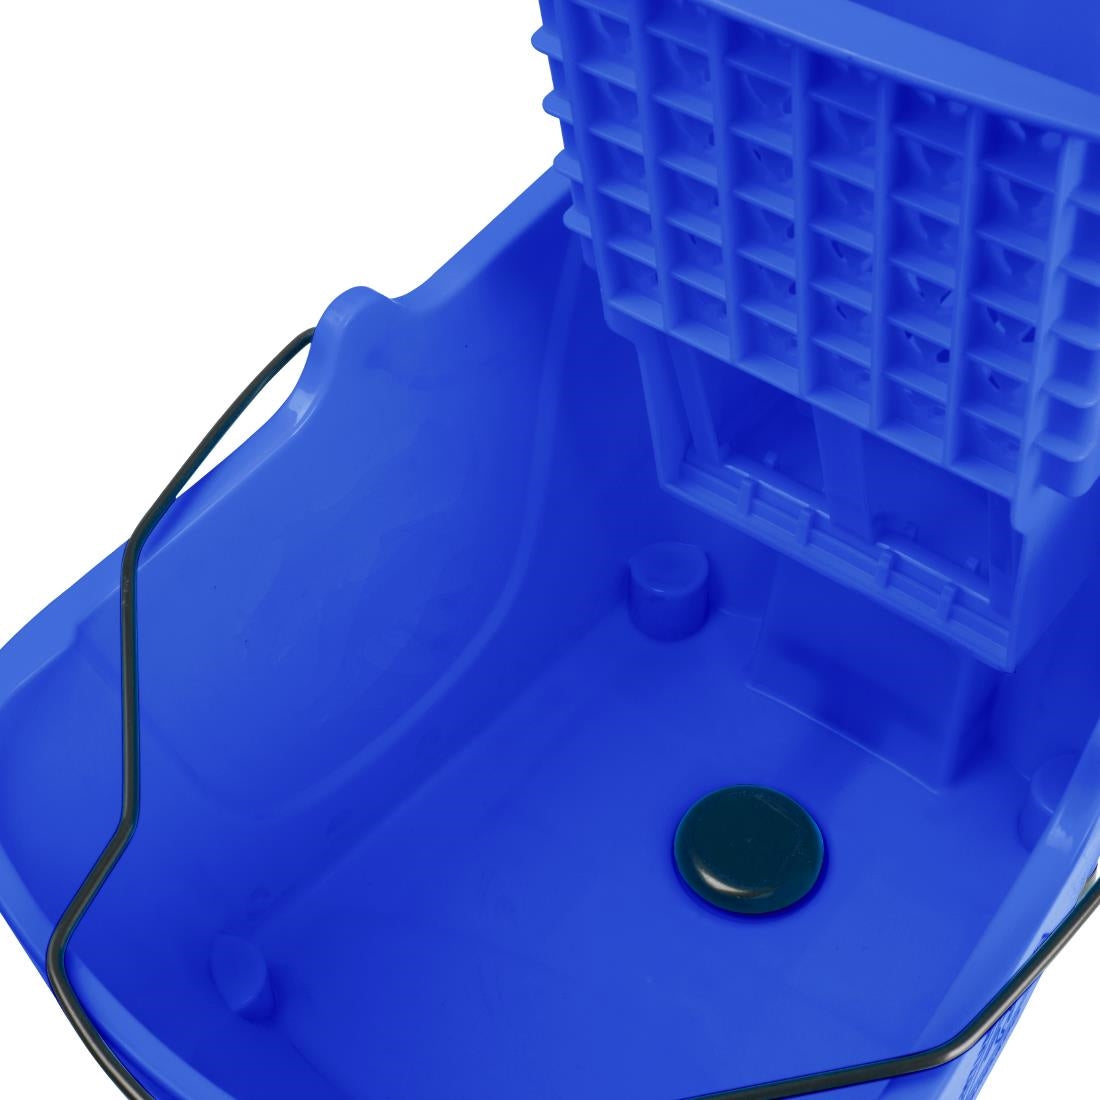 FW869 Jantex 30ltr Mop Bucket with Foot Pedal release - Blue